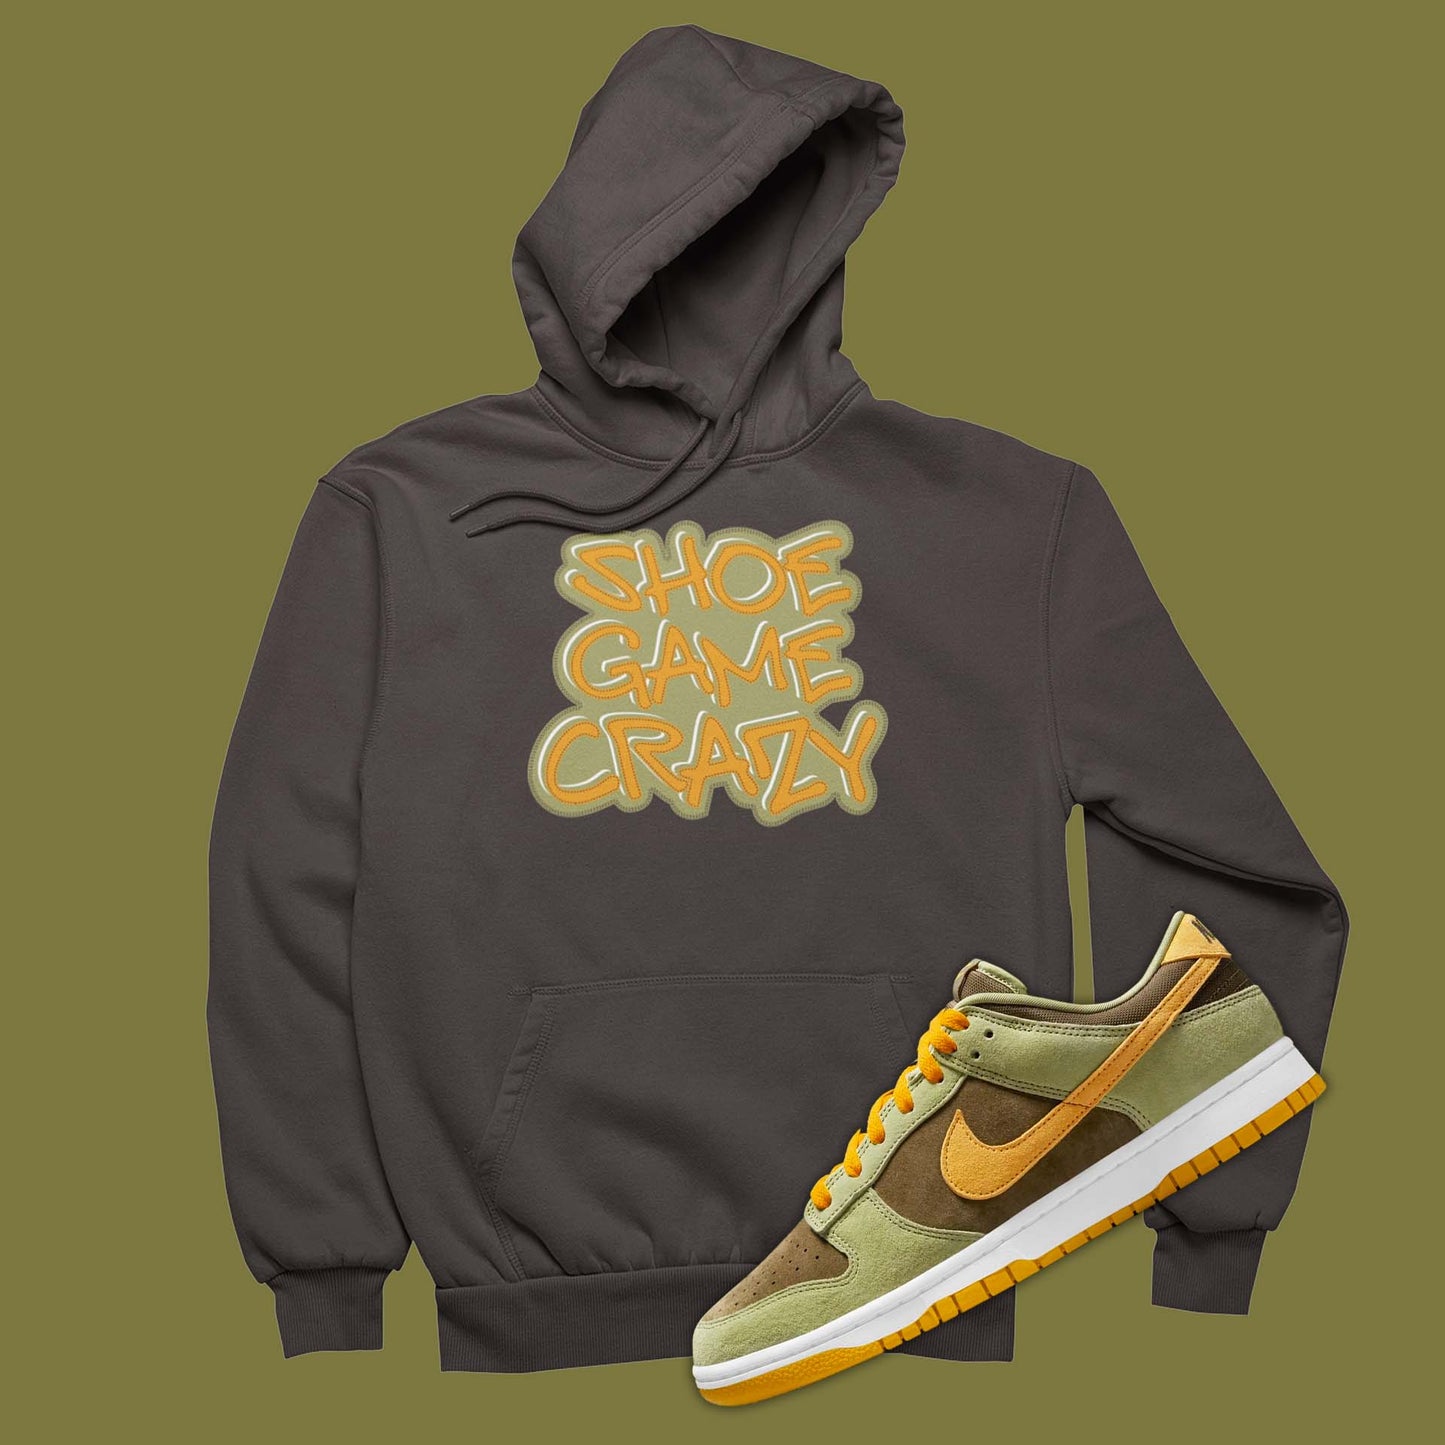 This sneaker match hoodie is the perfect sweatshirt to match your Nike Dunk Low Dusty Olive